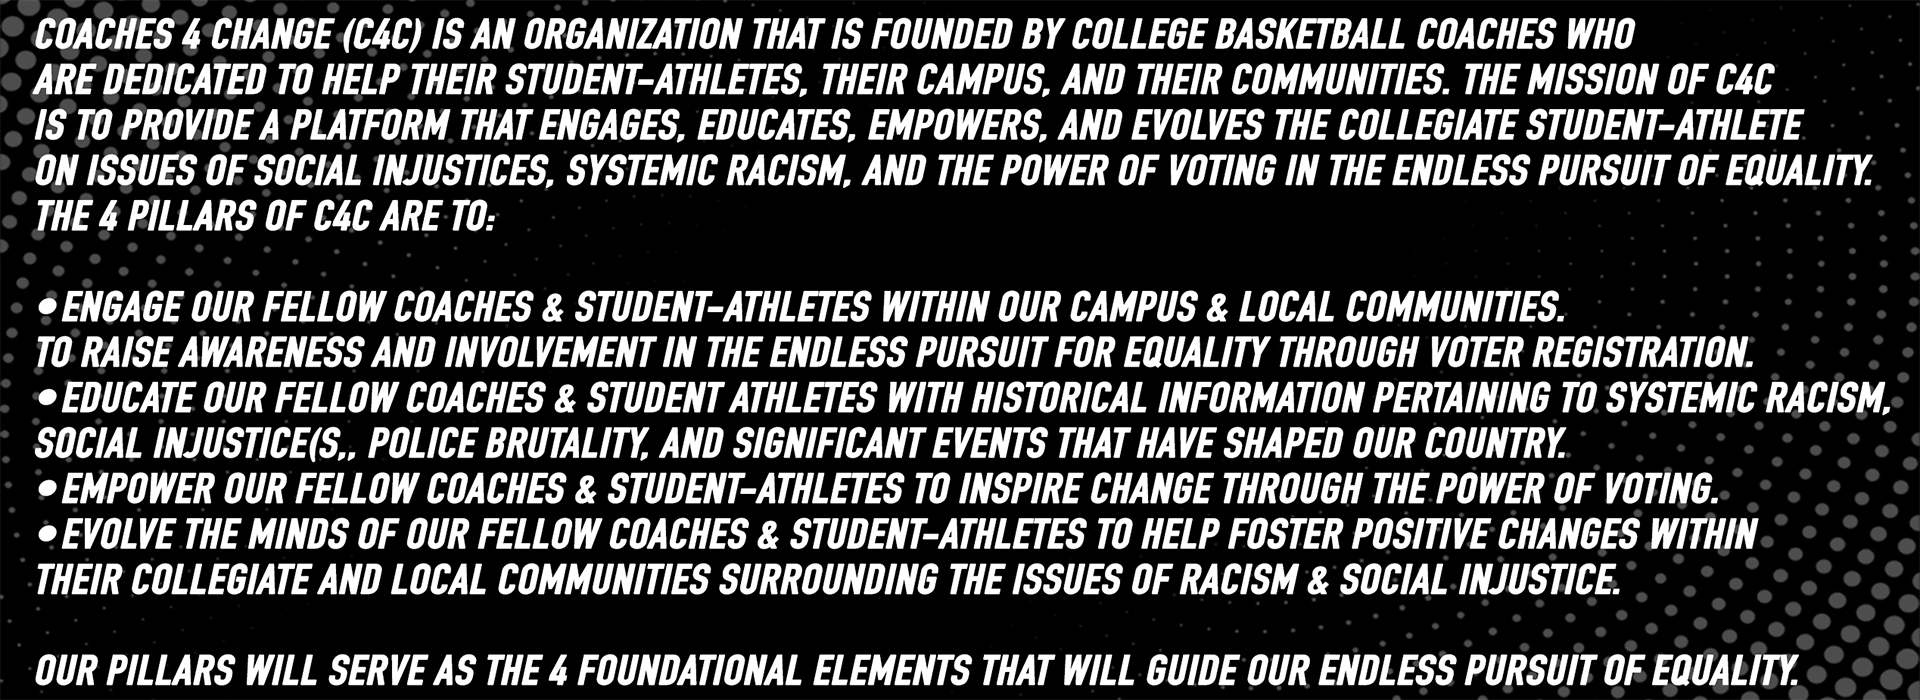 Coaches 4 Change launched to help student-athletes, campuses and communities